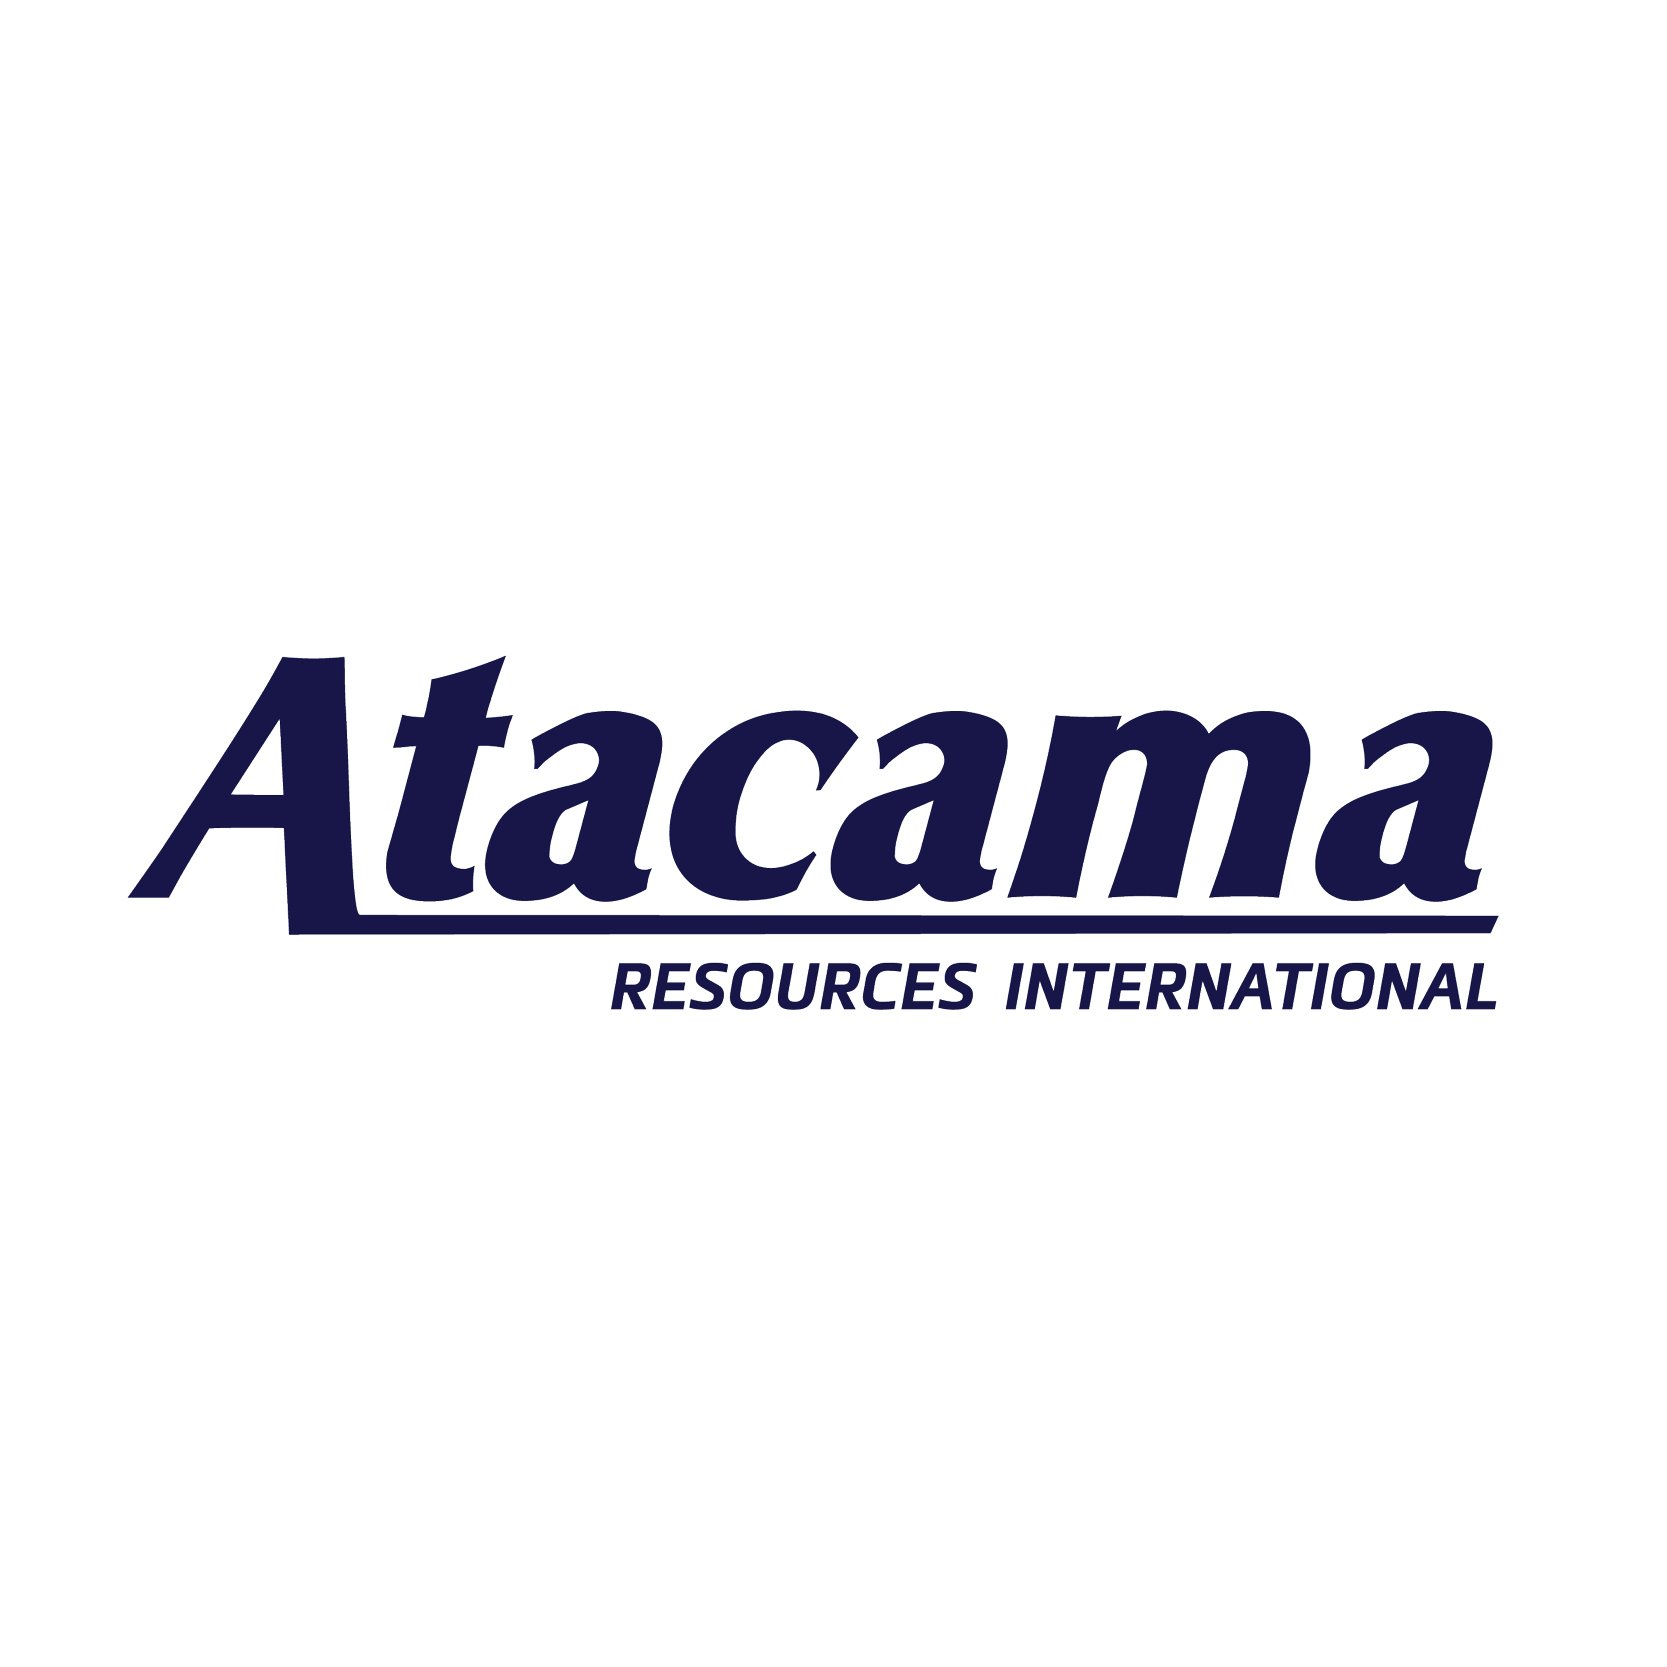 Atacama Resources international, Inc. is a mineral exploration company with claims in northeastern Ontario. $ACRL. Tweets contain 